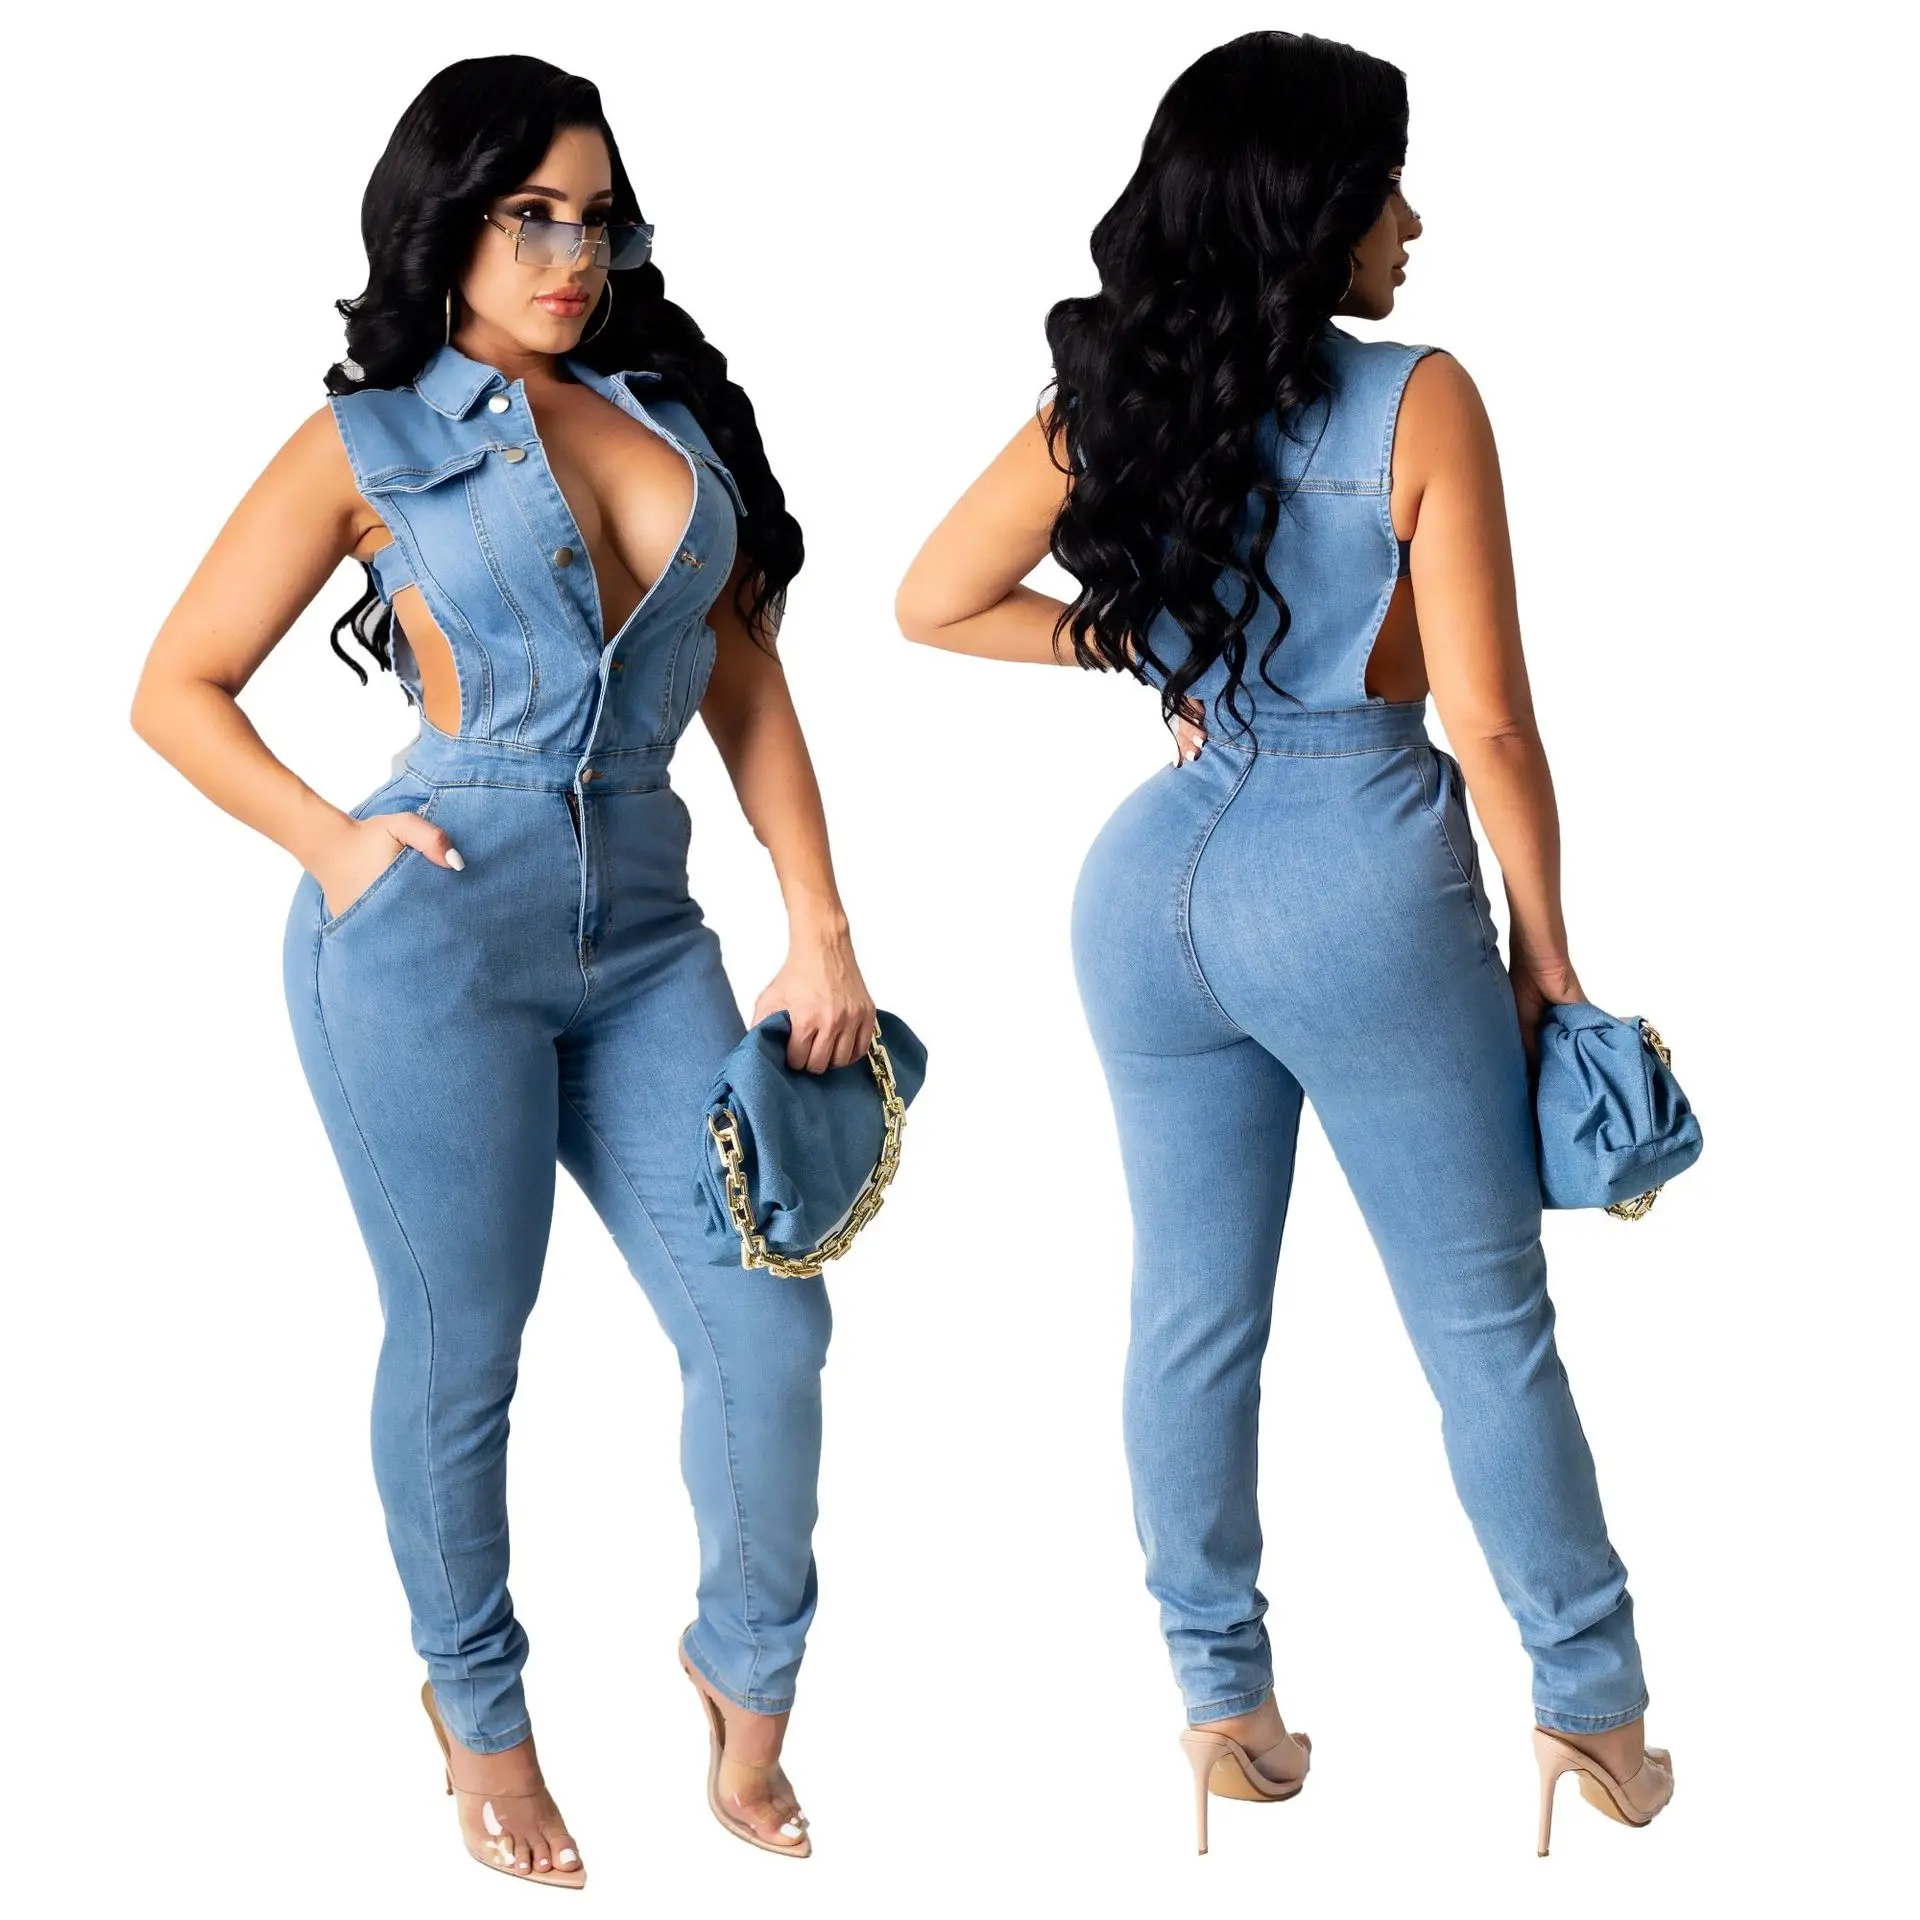 

Fall 2021 new, Europe and the United States sexy wear and fashion Jean woman decoration body jumpsuit, Orange/light blue/purple/golden